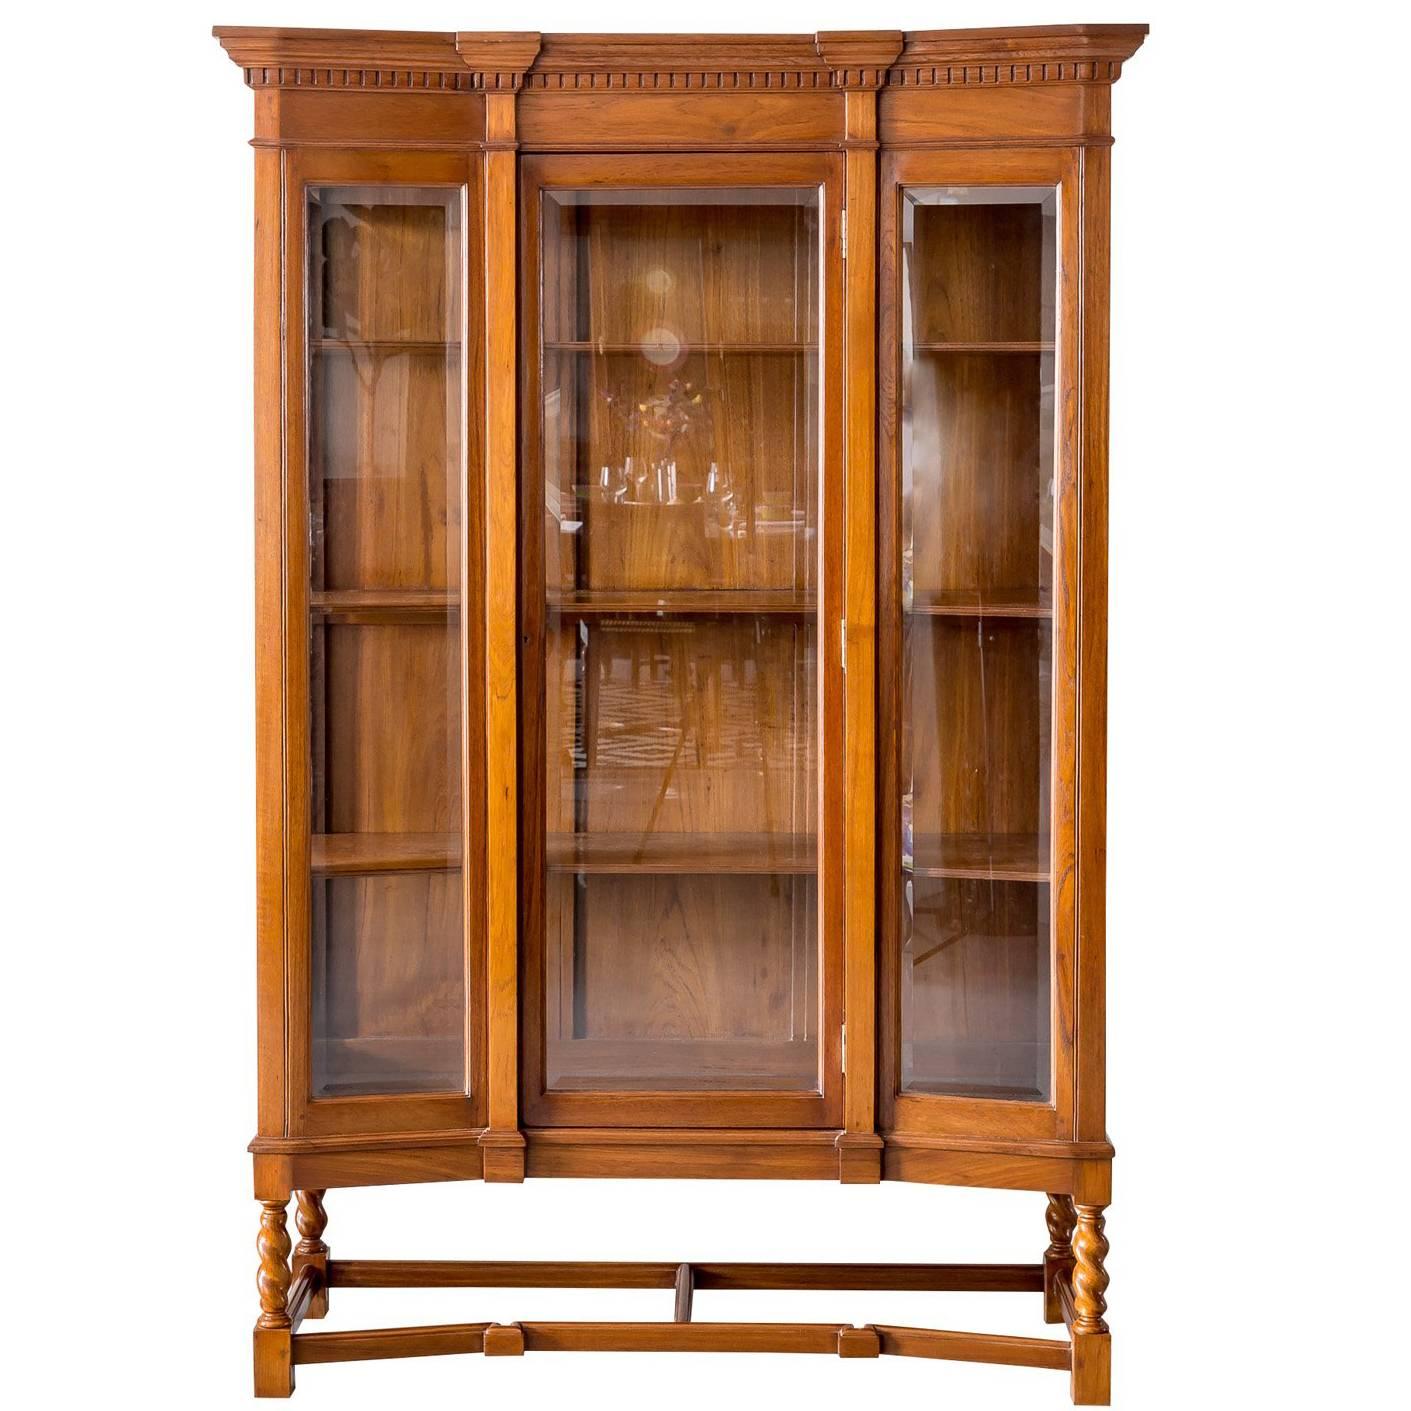 Antique Anglo-Indian or British Colonial Teak Wood Display Cabinet For Sale